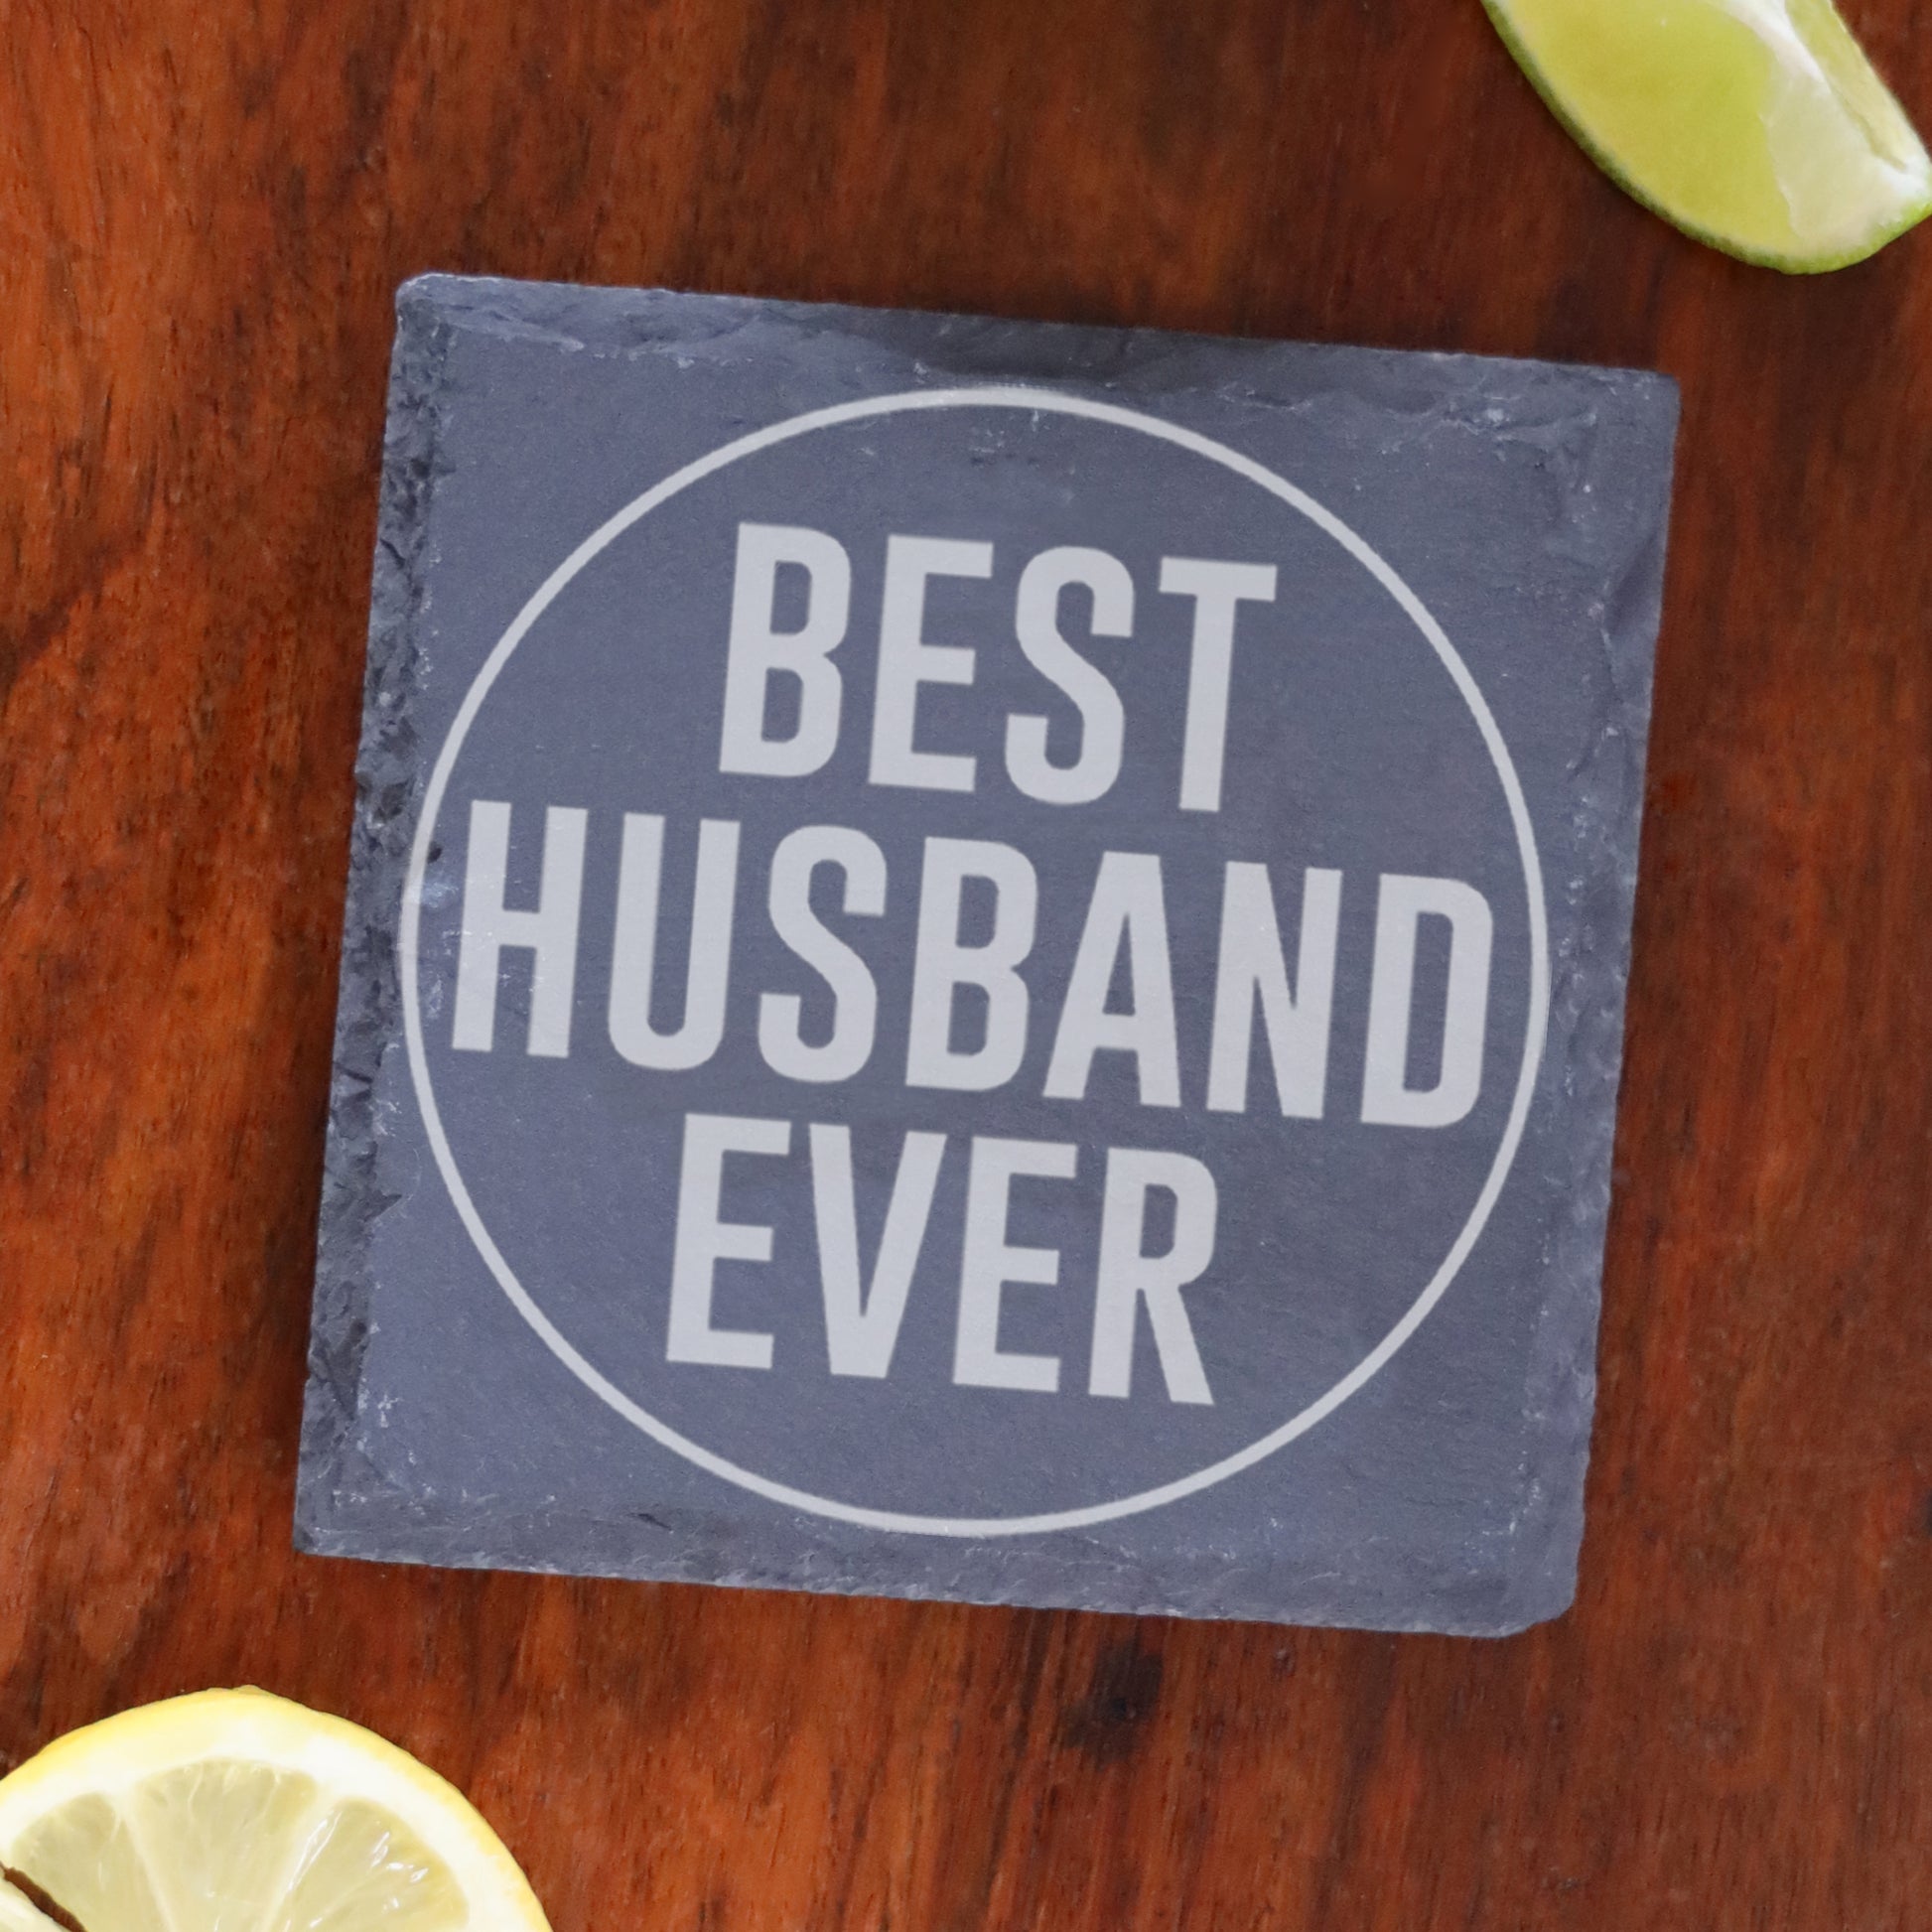 Best Husband Ever Engraved Wine Glass and/or Coaster Gift  - Always Looking Good - Square Coaster Only  